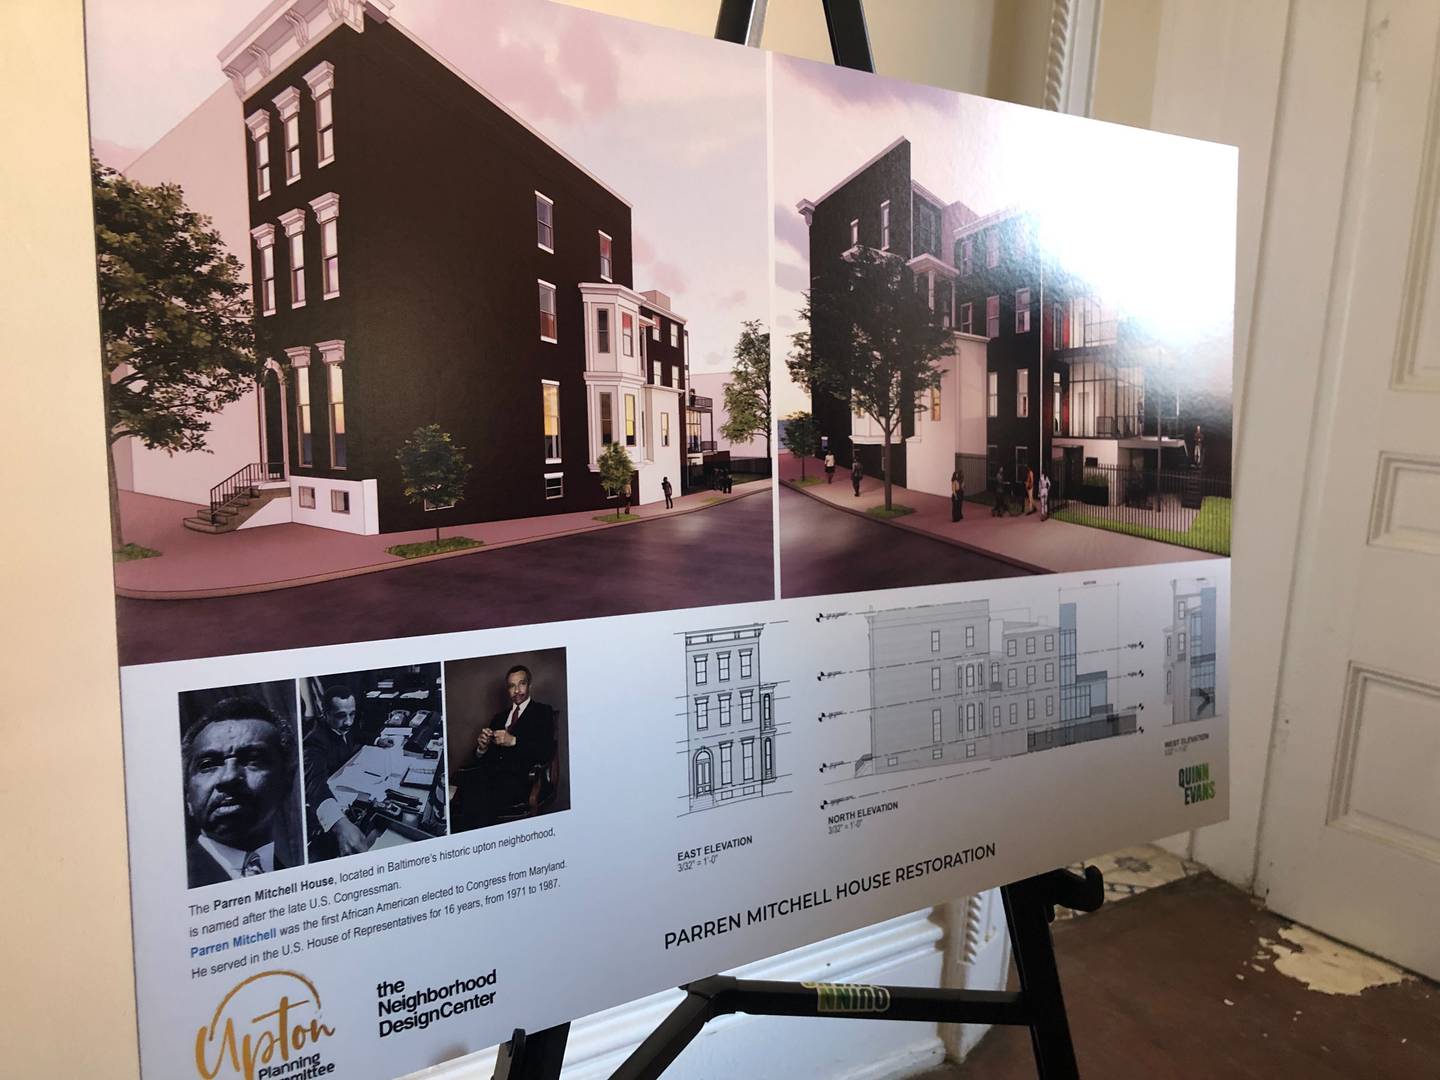 Baltimore City and civic leaders announced plans to renovate the former Parren Mitchell house into what they are calling the West Baltimore Civic and Entrepreneurship Center. The transformed building, which once hosted leaders of the Civil Rights Movement, will be used as a meeting space, offices, and a gallery that will showcase mementos of Mitchell’s life and career in Congress.